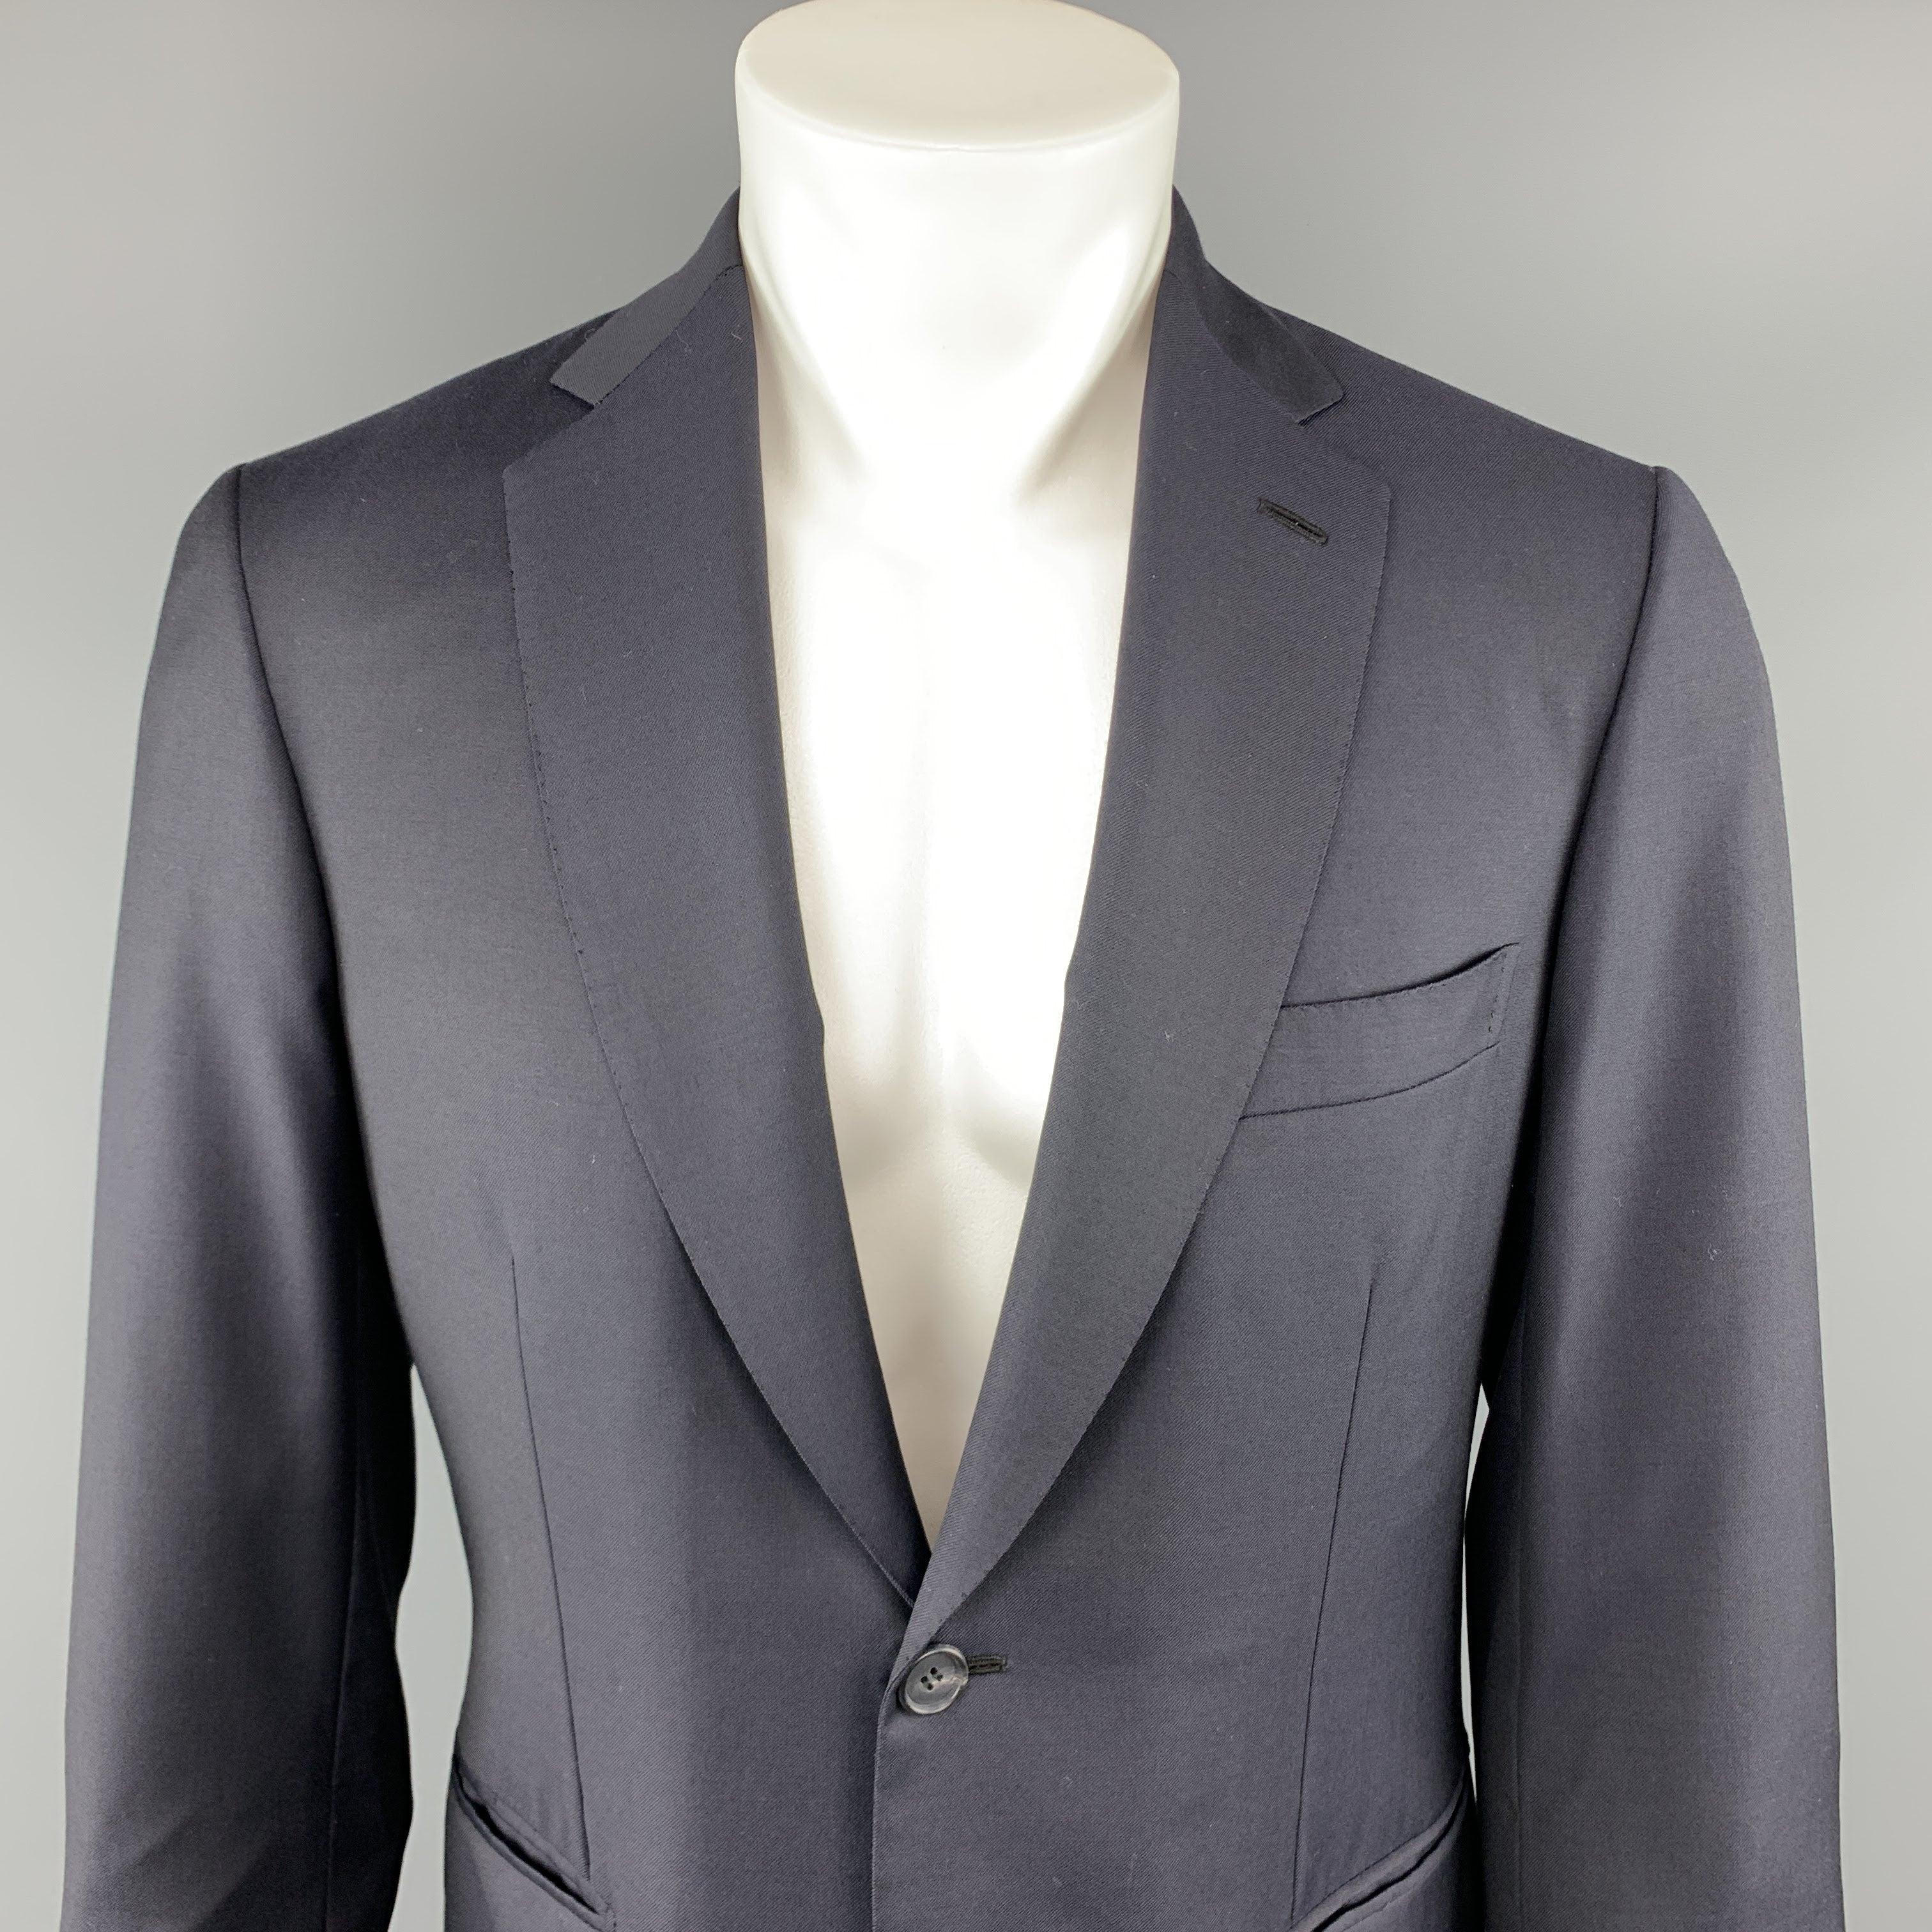 BRIONI by WILKES BASHFORD sport coat comes in a navy wool featuring a notch lapel style, flap pockets, and a two button closure. 
Excellent Pre-Owned Condition.
 

Marked:   (No size)
 

Measurements: 
  
lShoulder: 18 inches  
lChest: 38 inches 